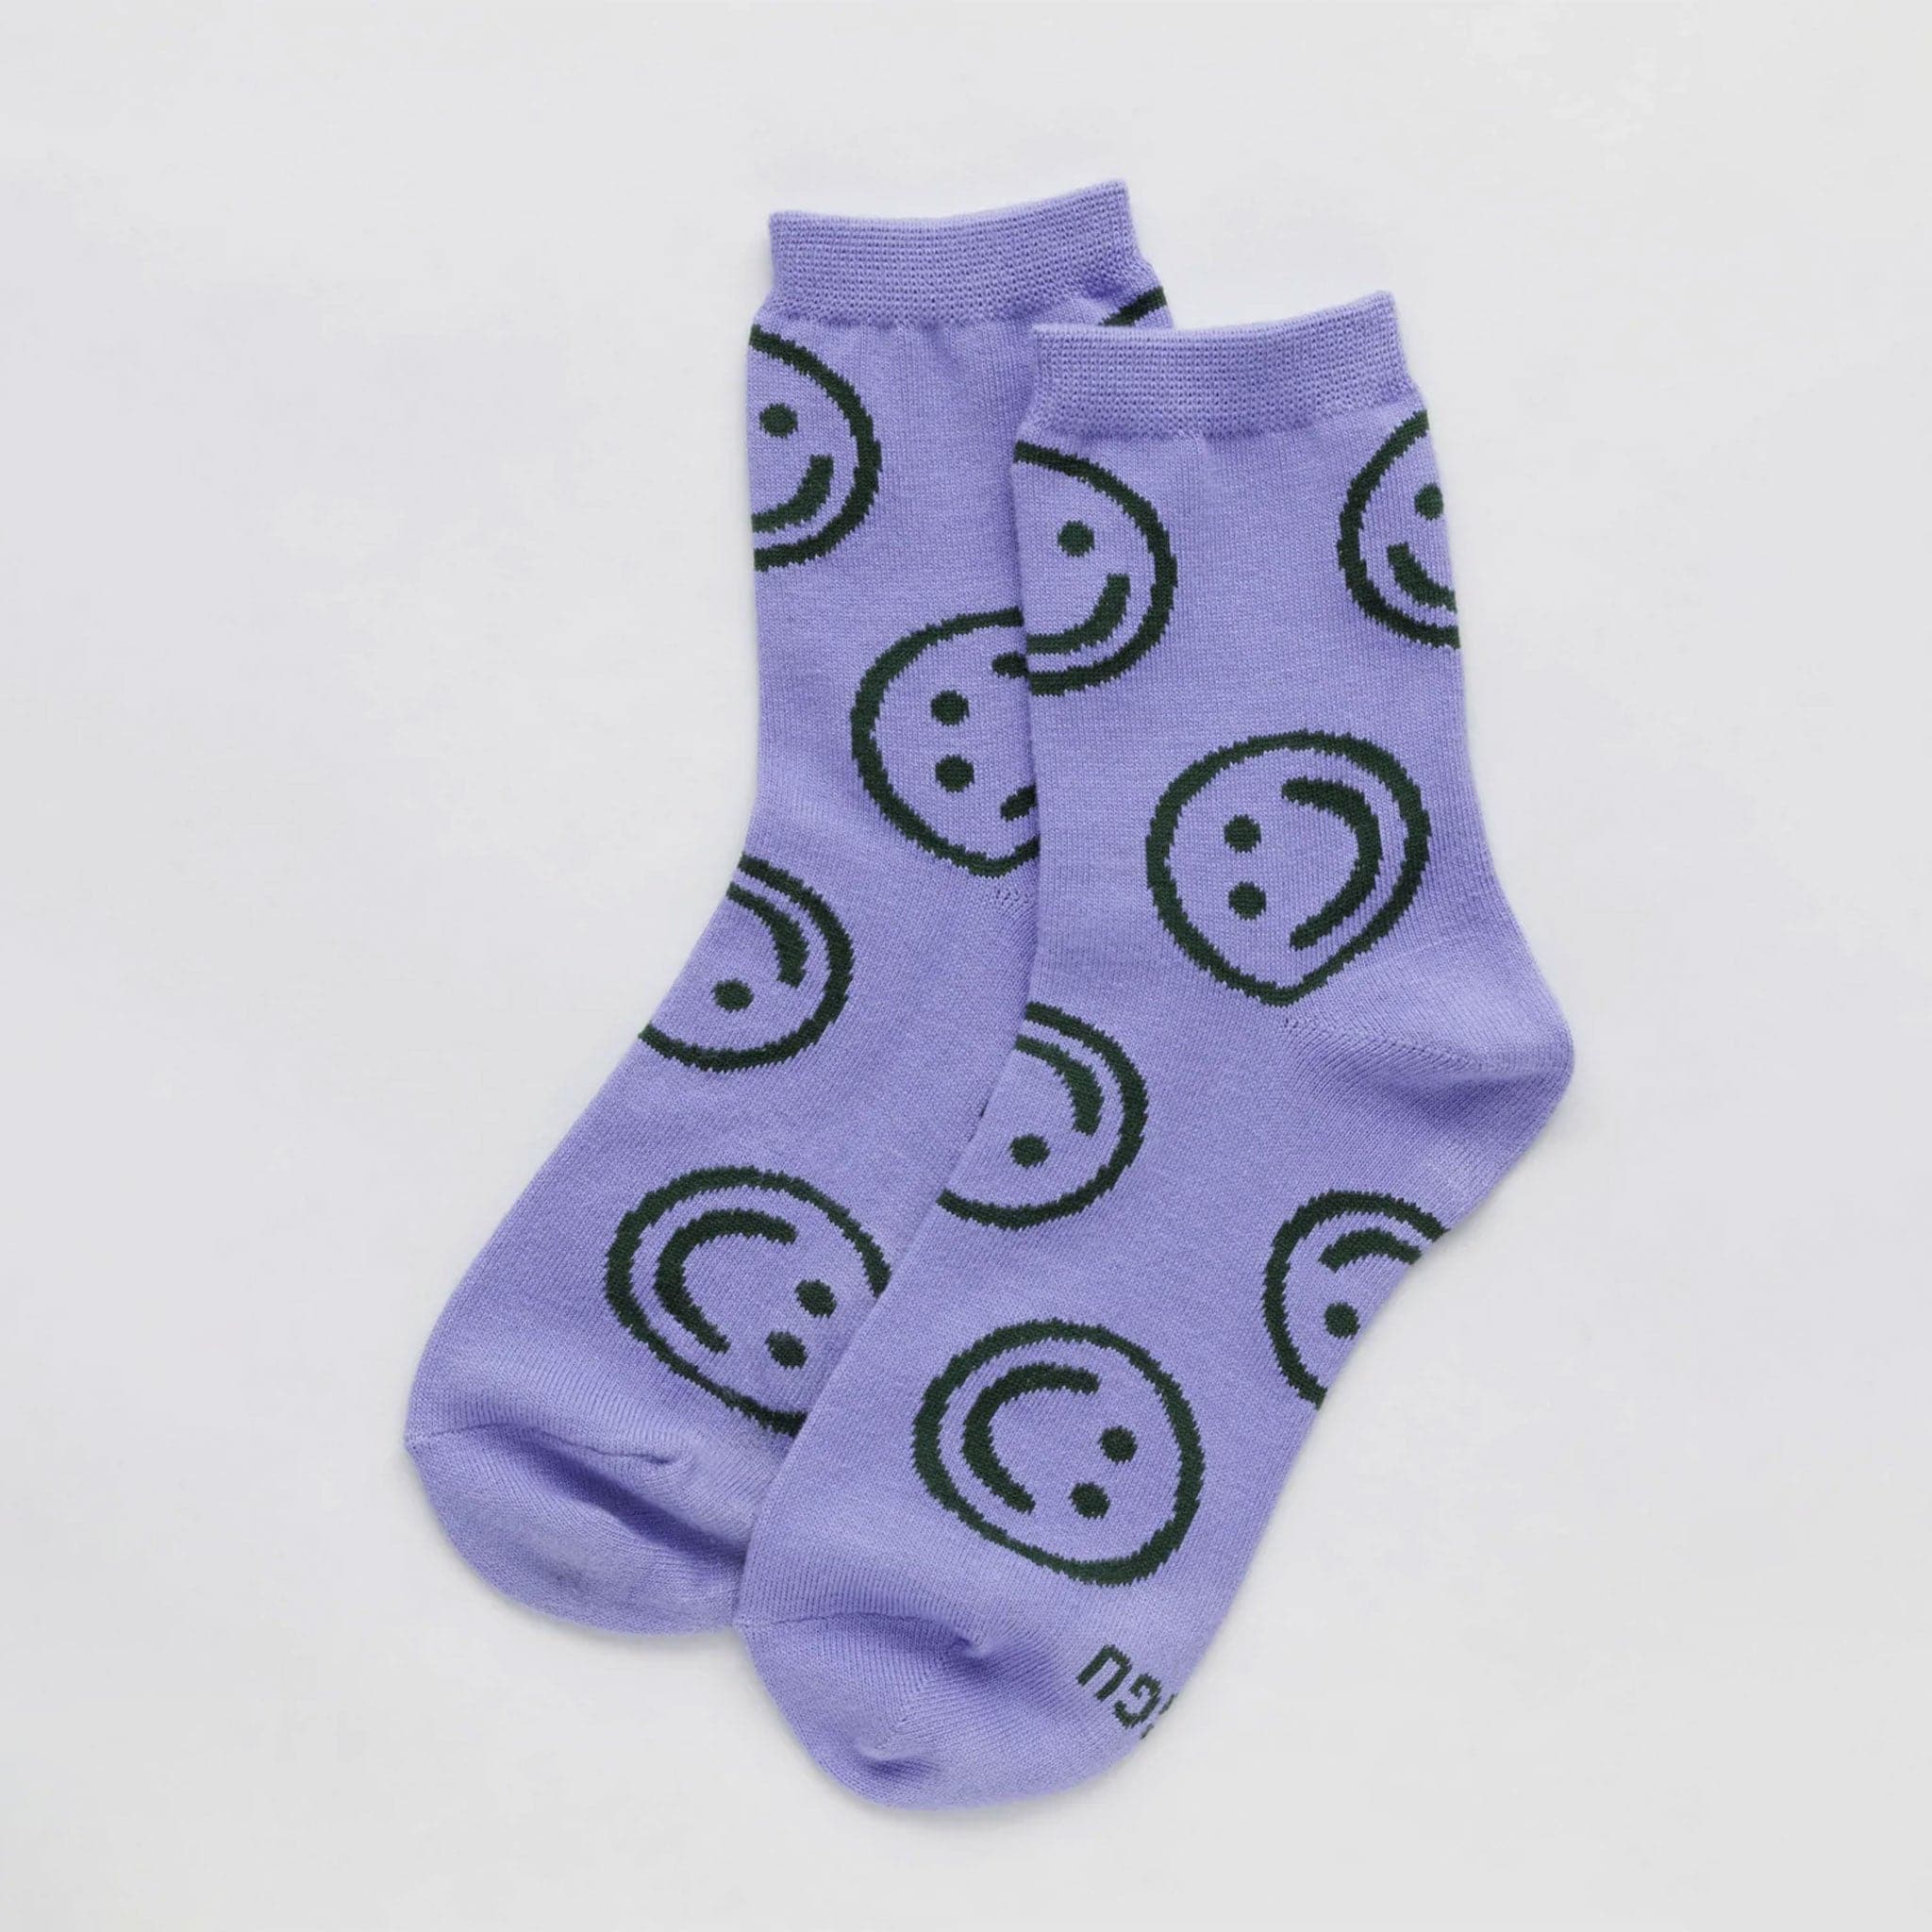 Purple mid calf socks with dark green smiley faces.